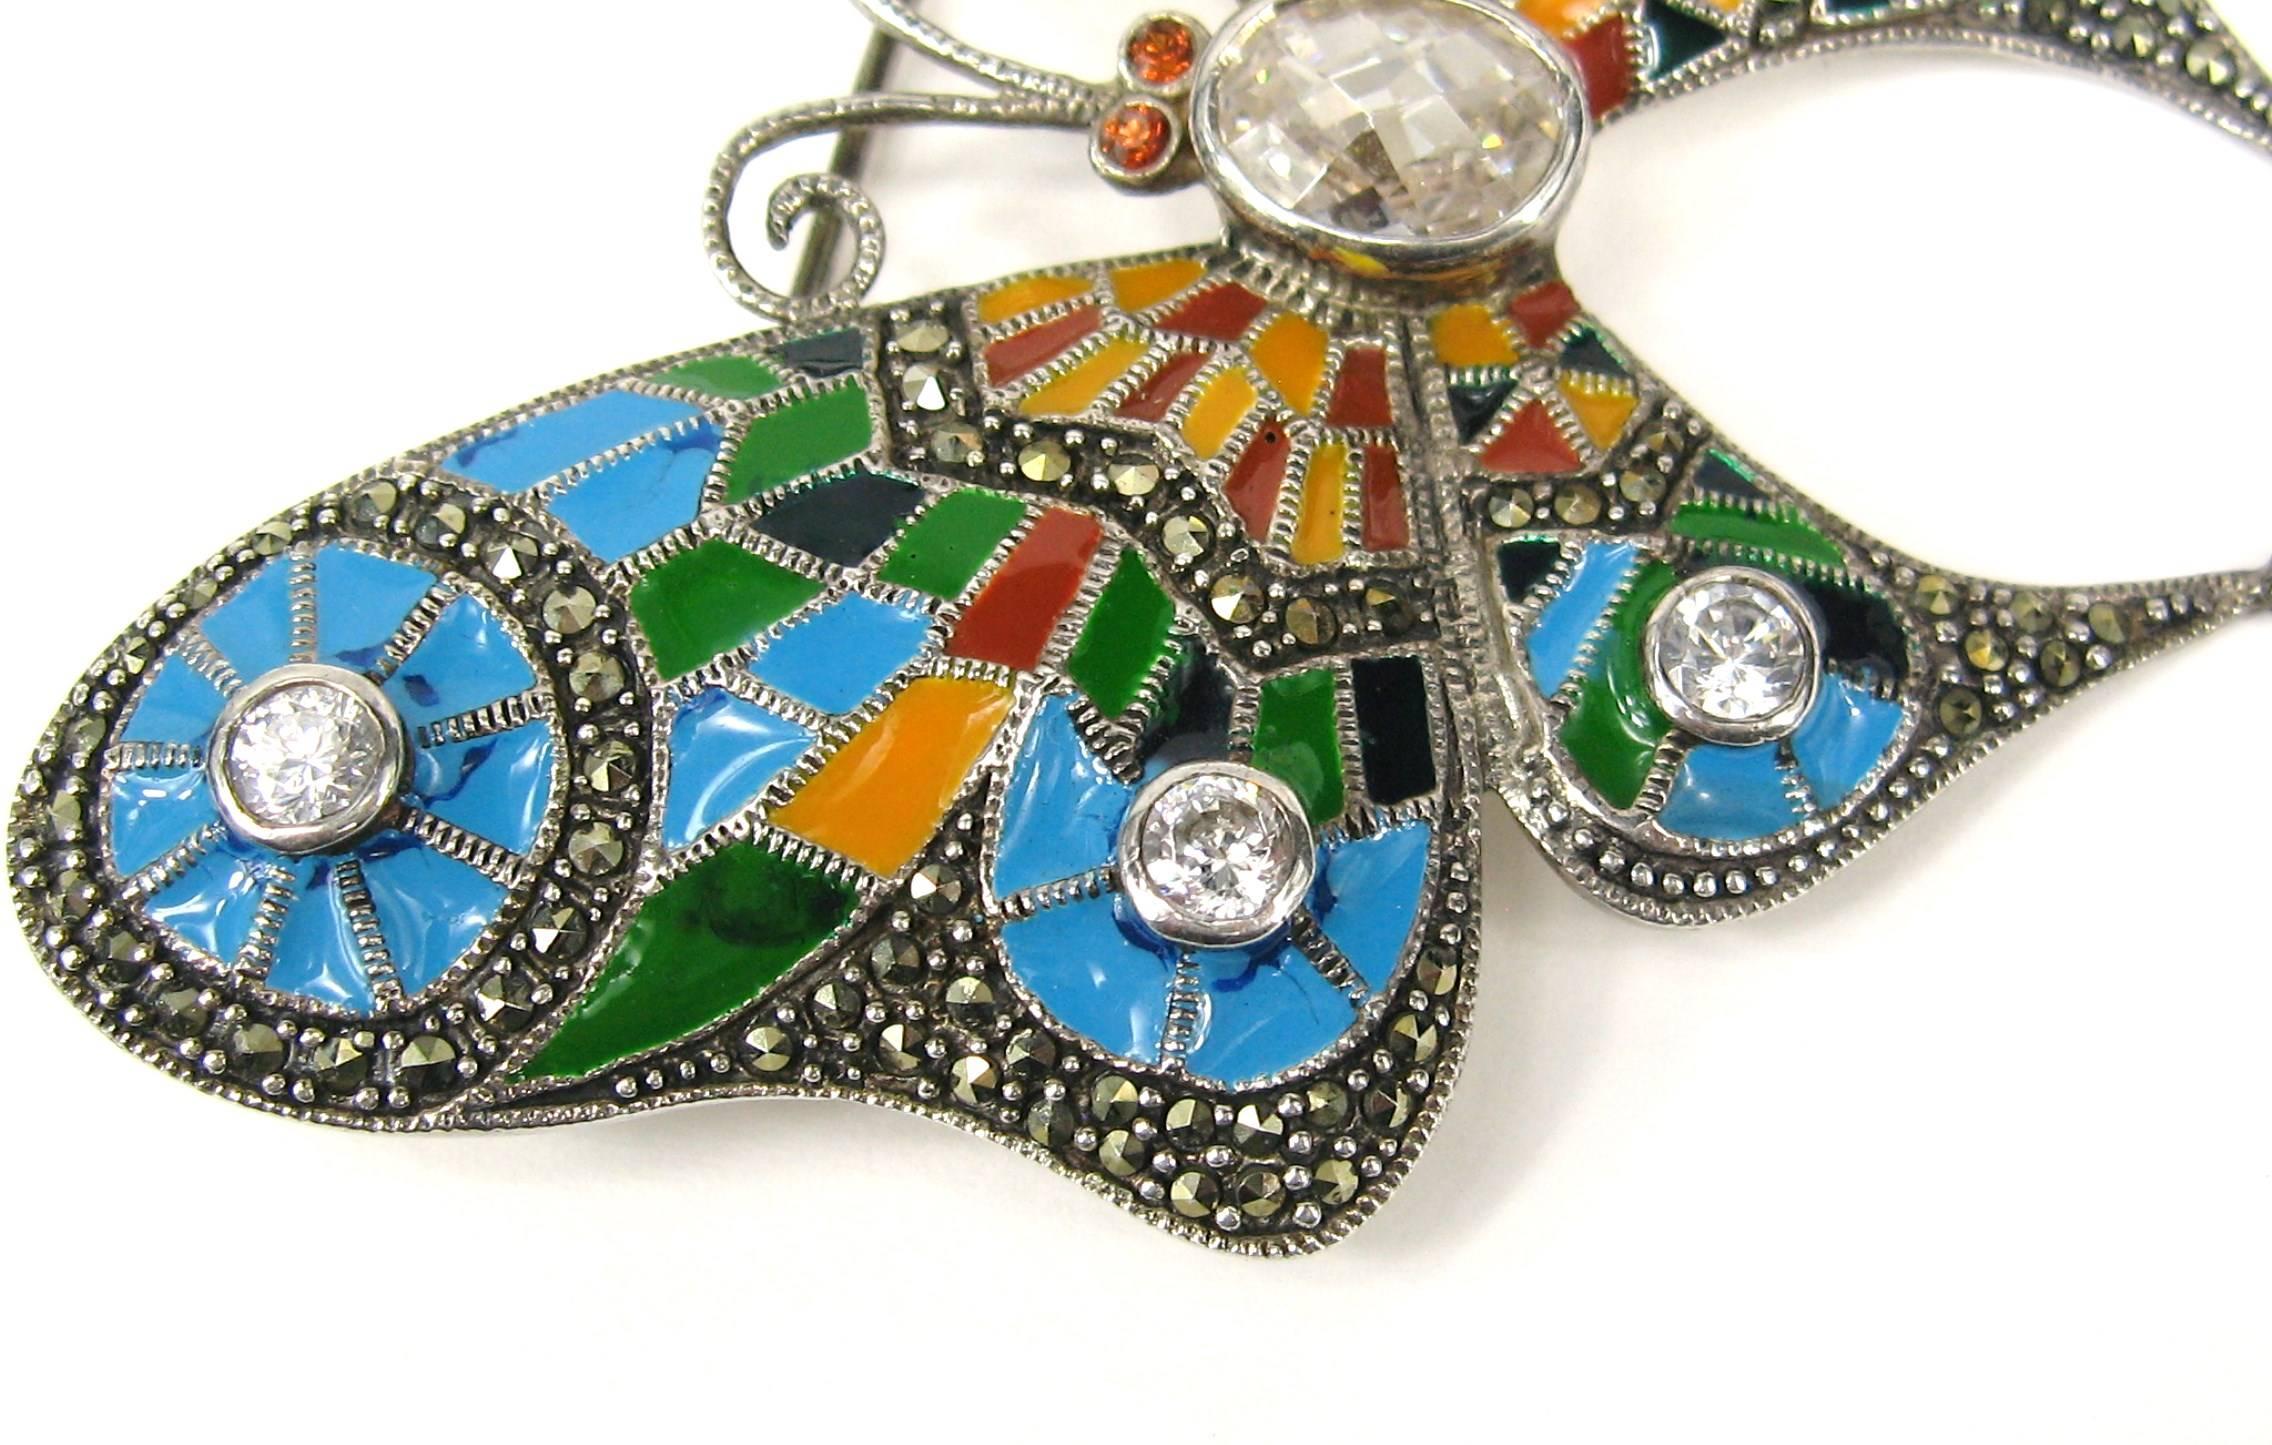 Stunning Sterling Silver Enameled Butterfly Brooch. Colors are Oranges, Blues and greens with a bit of black. This Measures 2.85 in x 2.44 in wide. Marcasites scattered throughout the Brooch and a large faceted crystal in the center. Bezel set